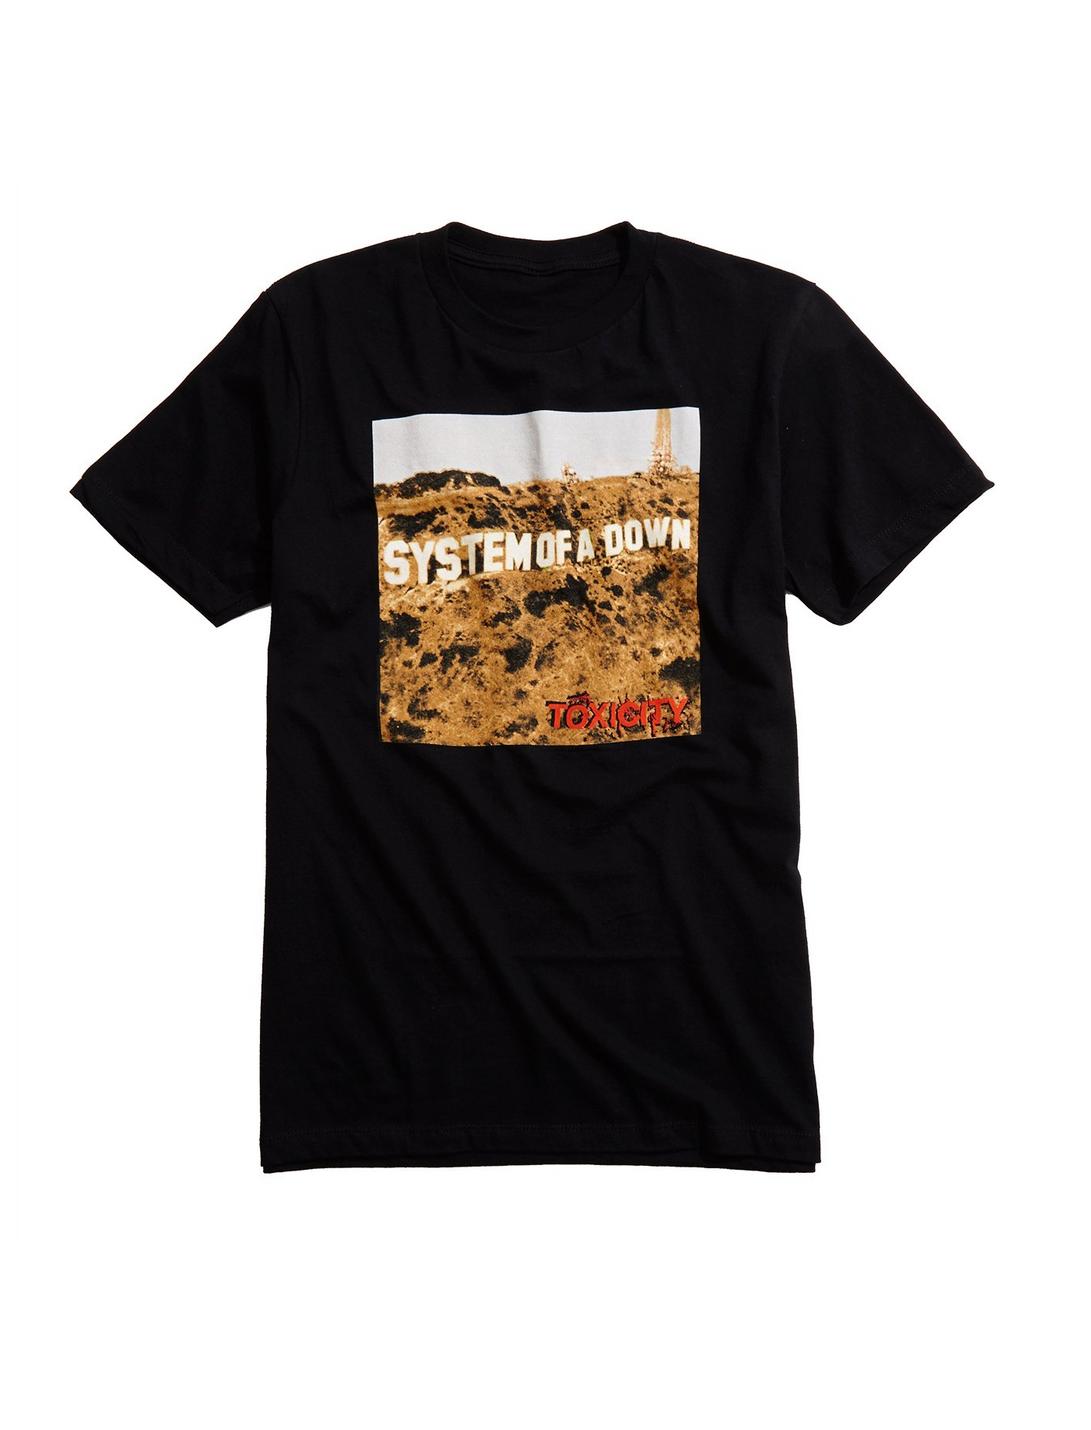 System Of A Down Toxicity T-Shirt, BLACK, hi-res